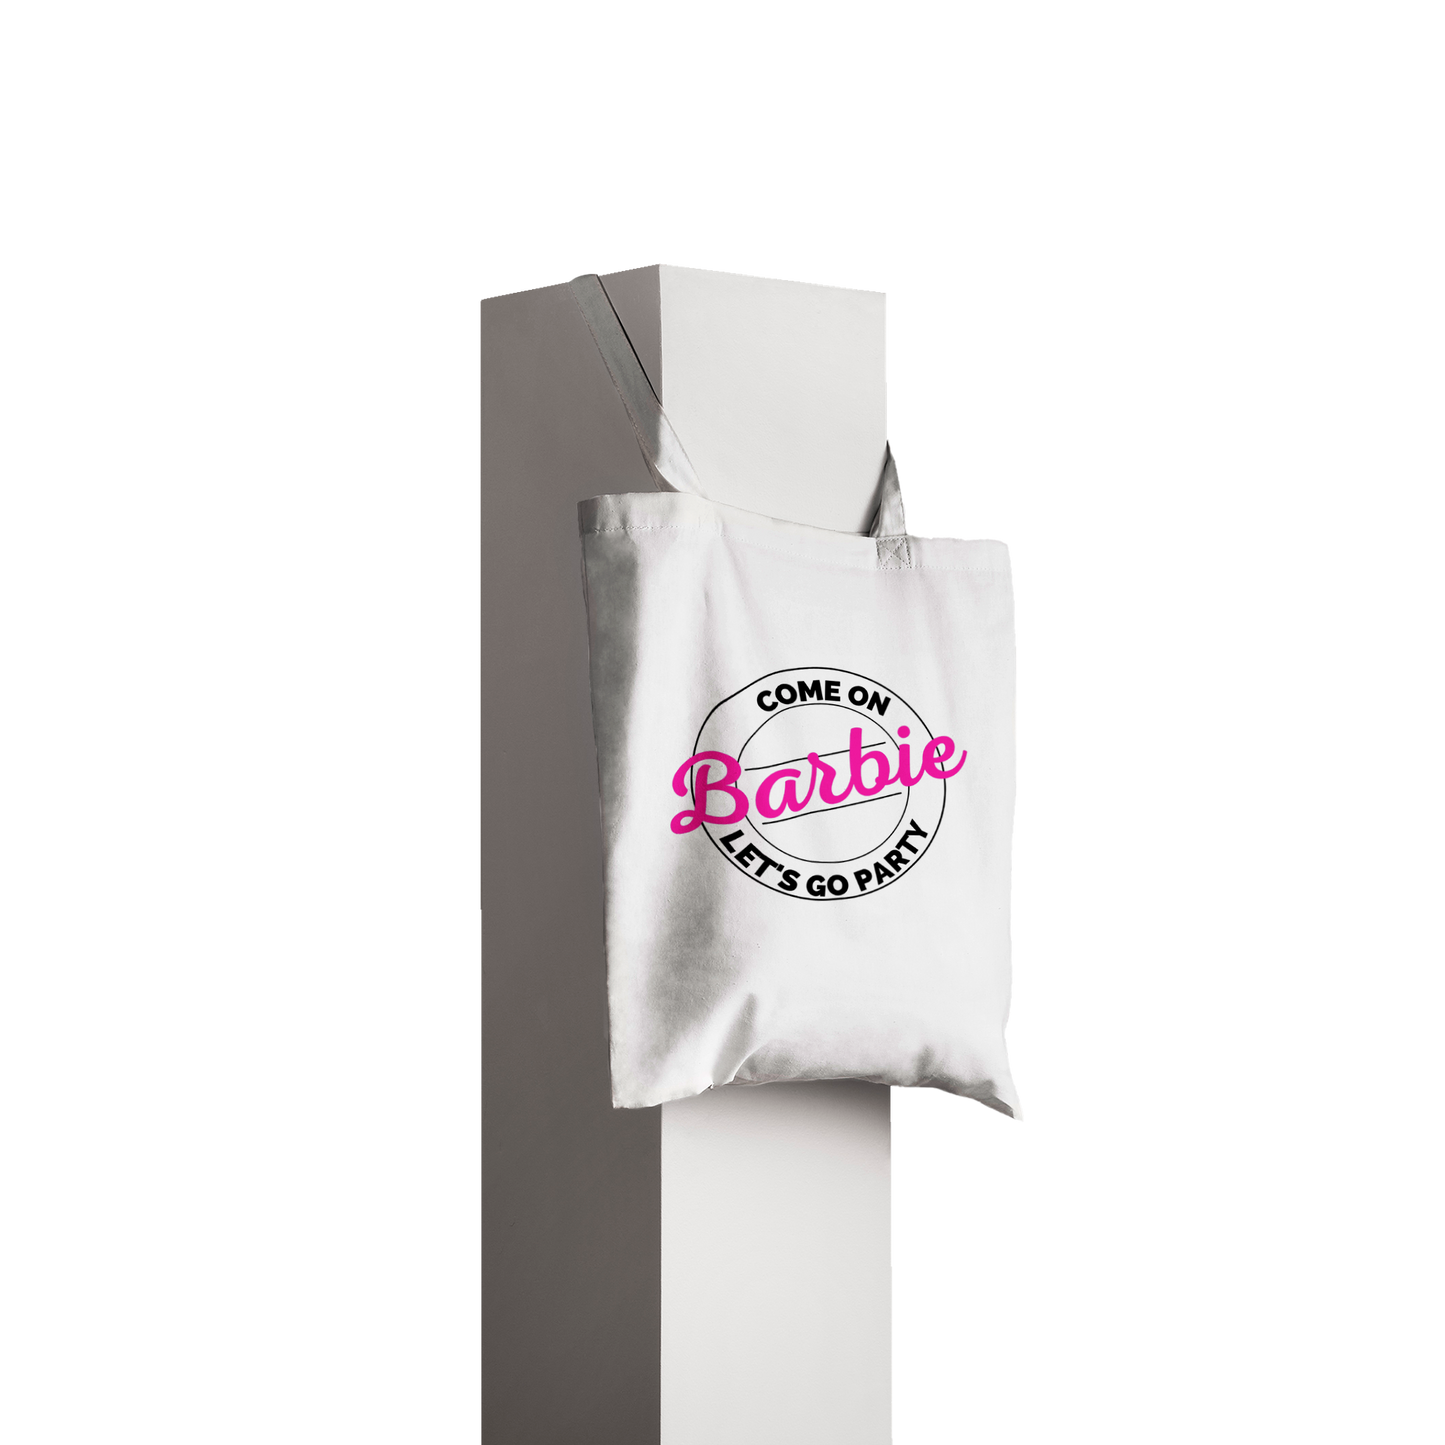 Come on Barbie - Classic Tote Bag